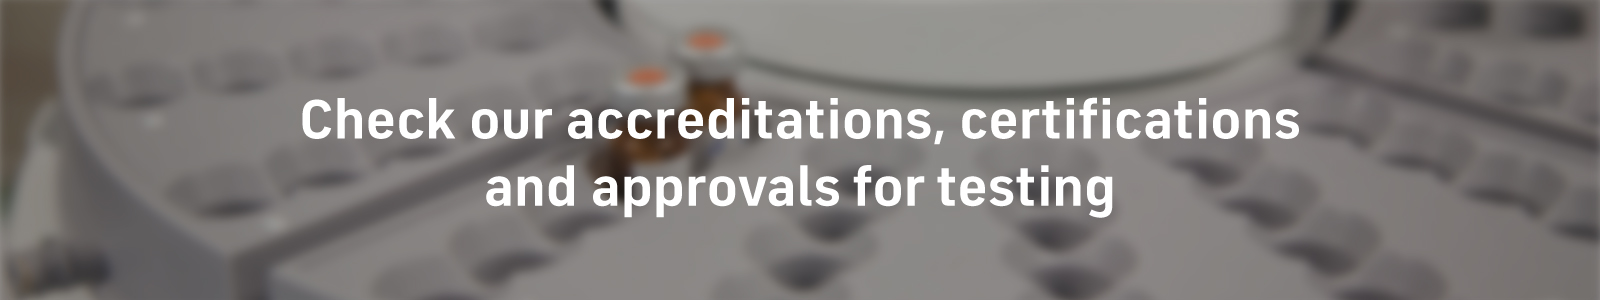 Check ITENE'S accreditations, certifications and approvals for testing